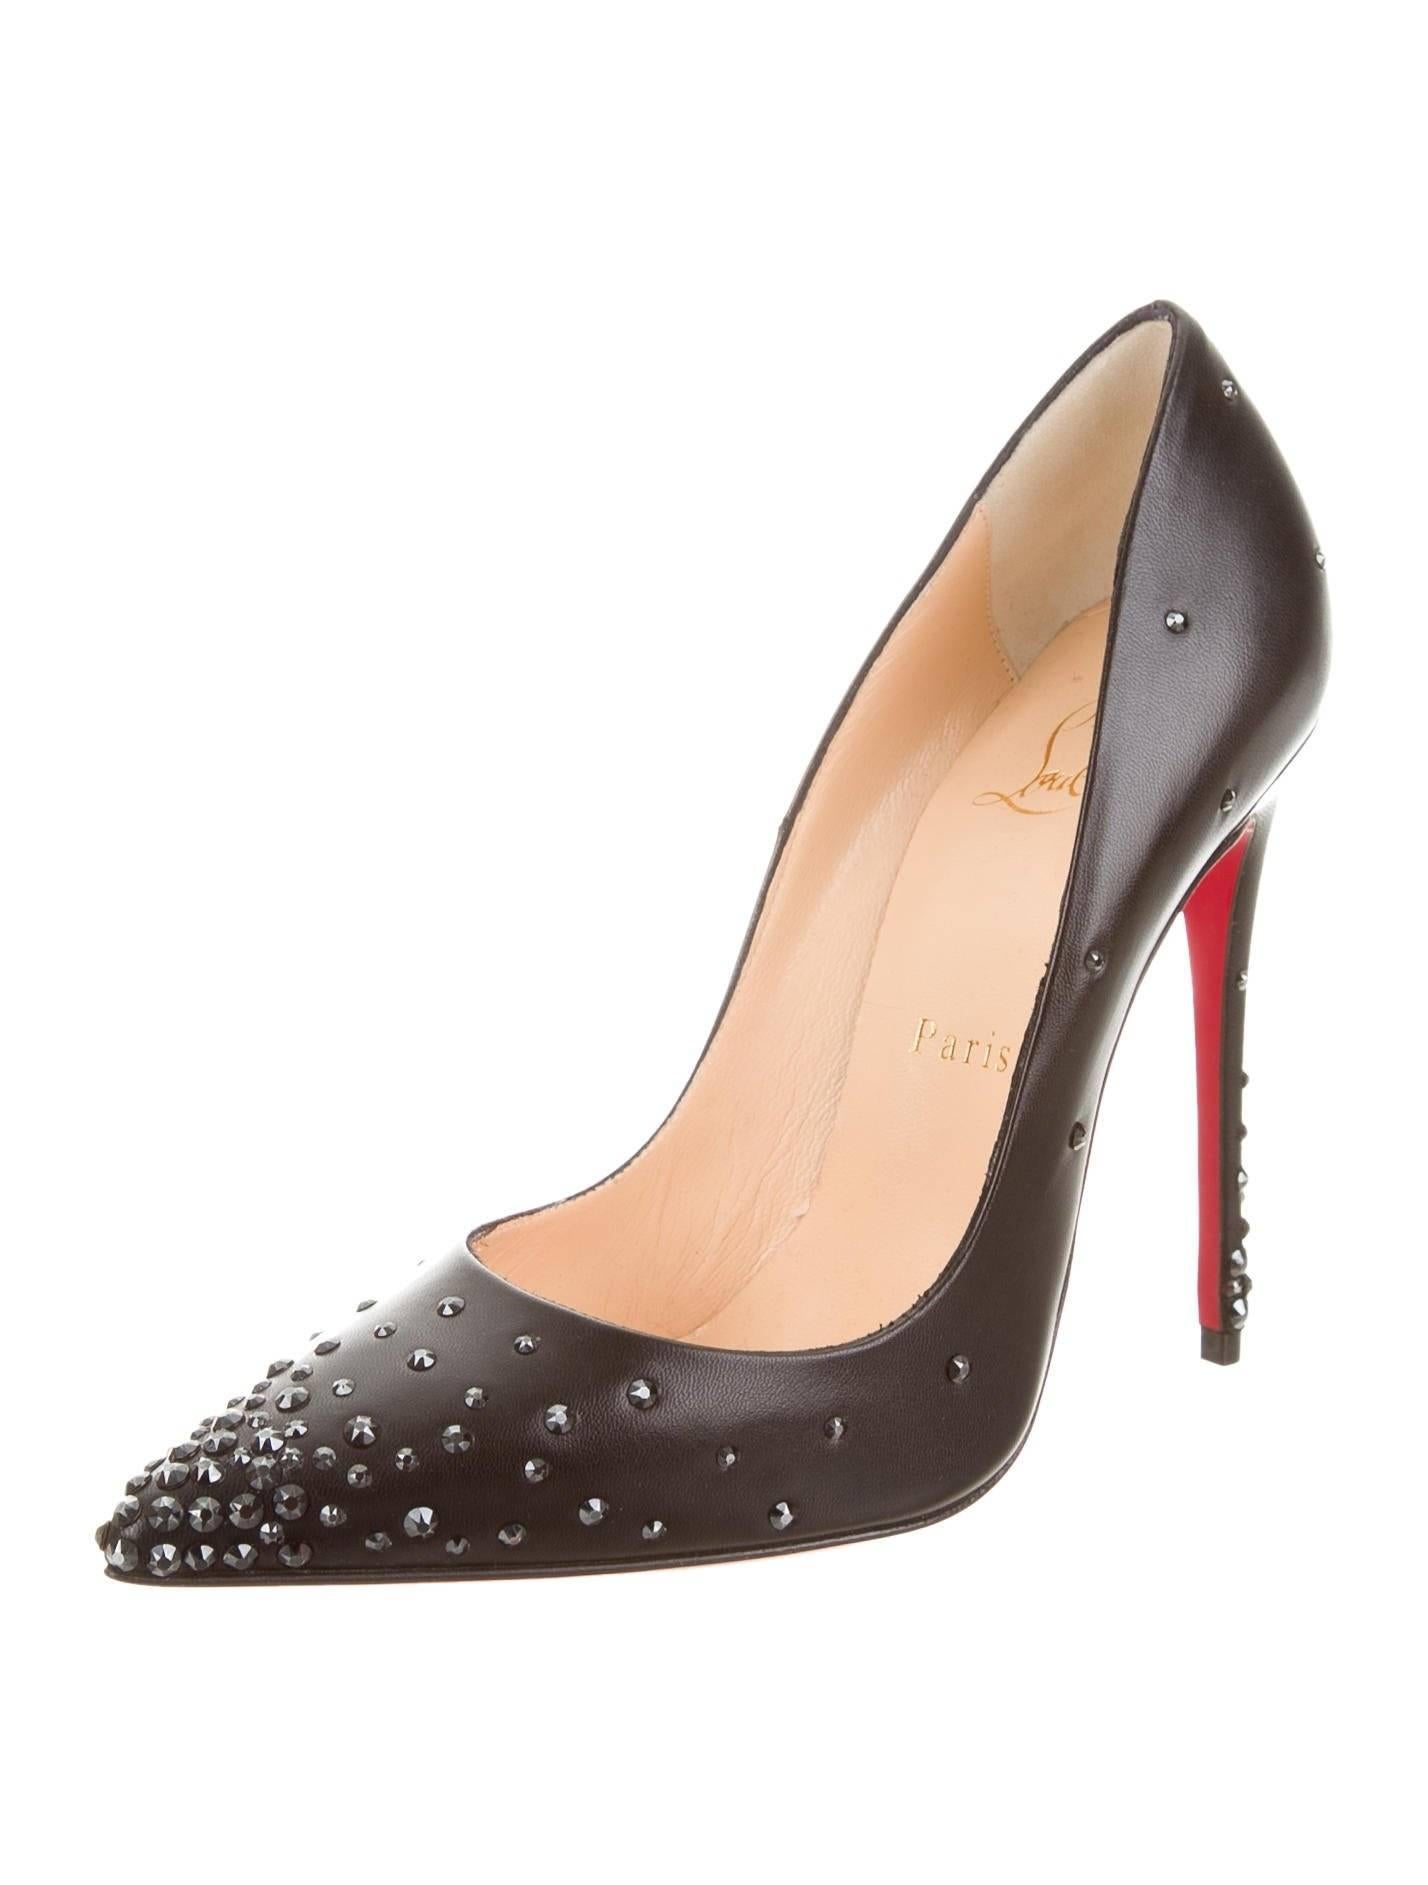 CURATOR'S NOTES  

Christian Louboutin New Sold Out Black Leather Crystal So Kate Heels Pumps W/Box    

Size IT 36.5 
Leather
Crystal 
Made in Italy 
Heel height 4.75" (120mm) 
Includes original Christian Louboutin dust bag and box
